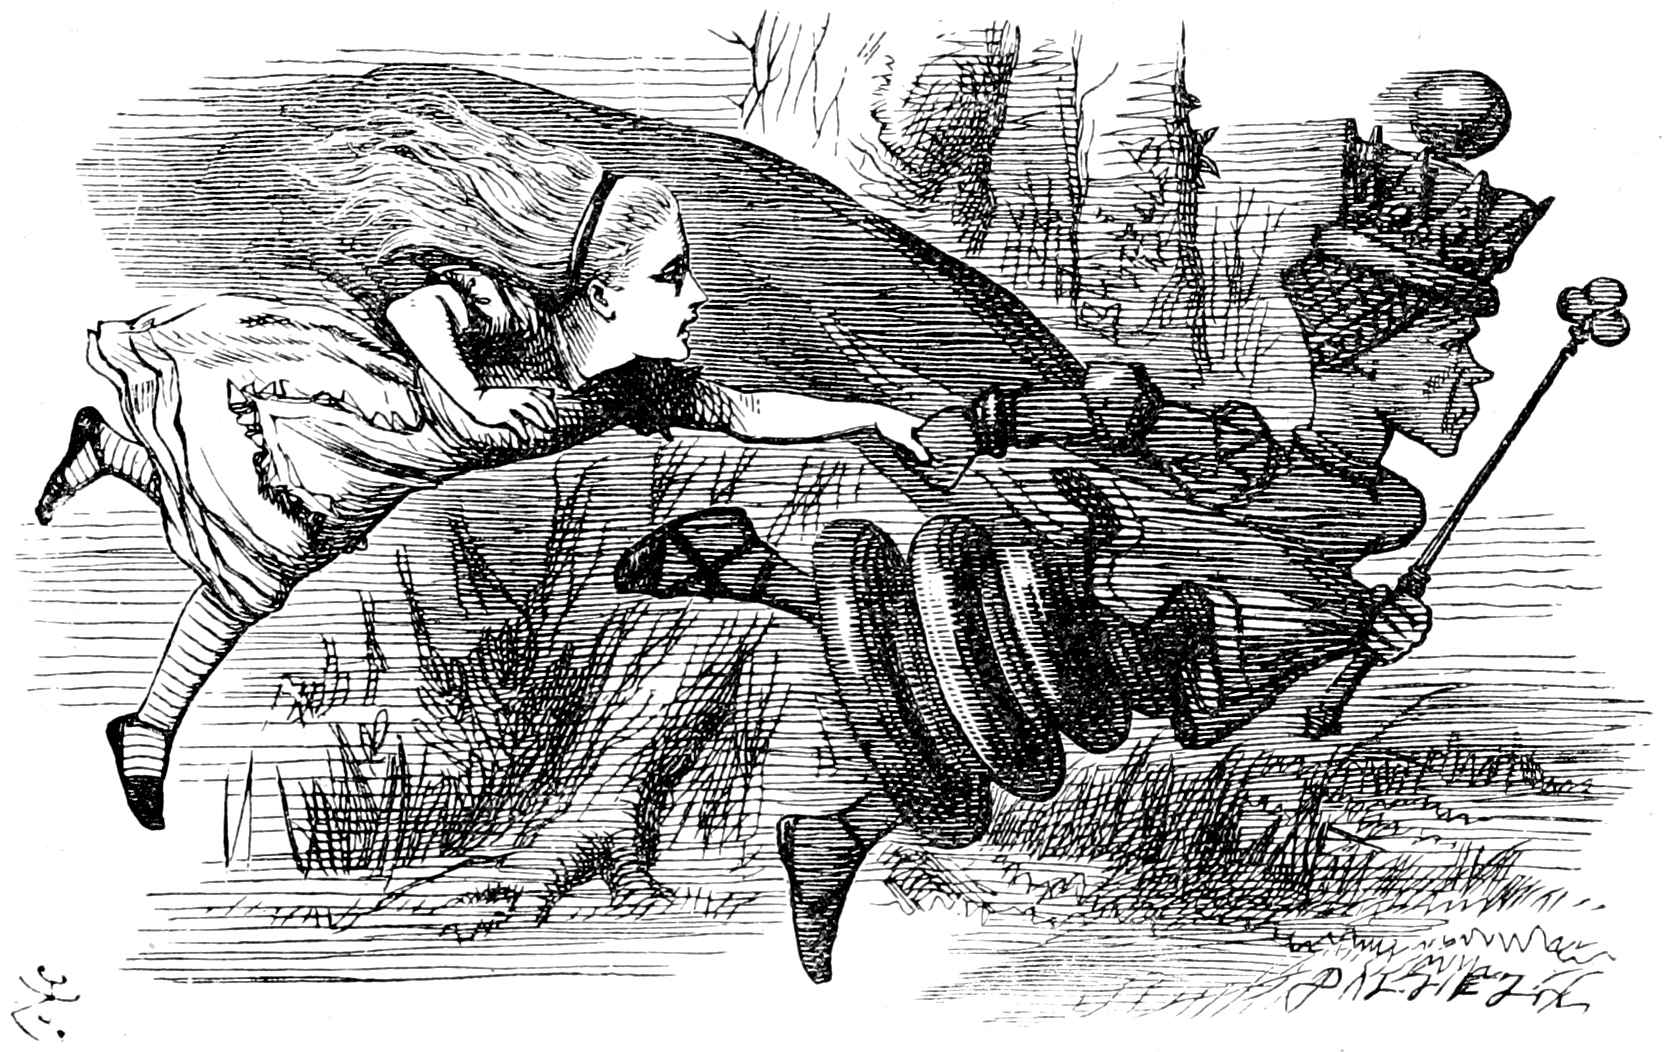 A 19th century illustration of the Red Queen pulling the character Alice by the arm.